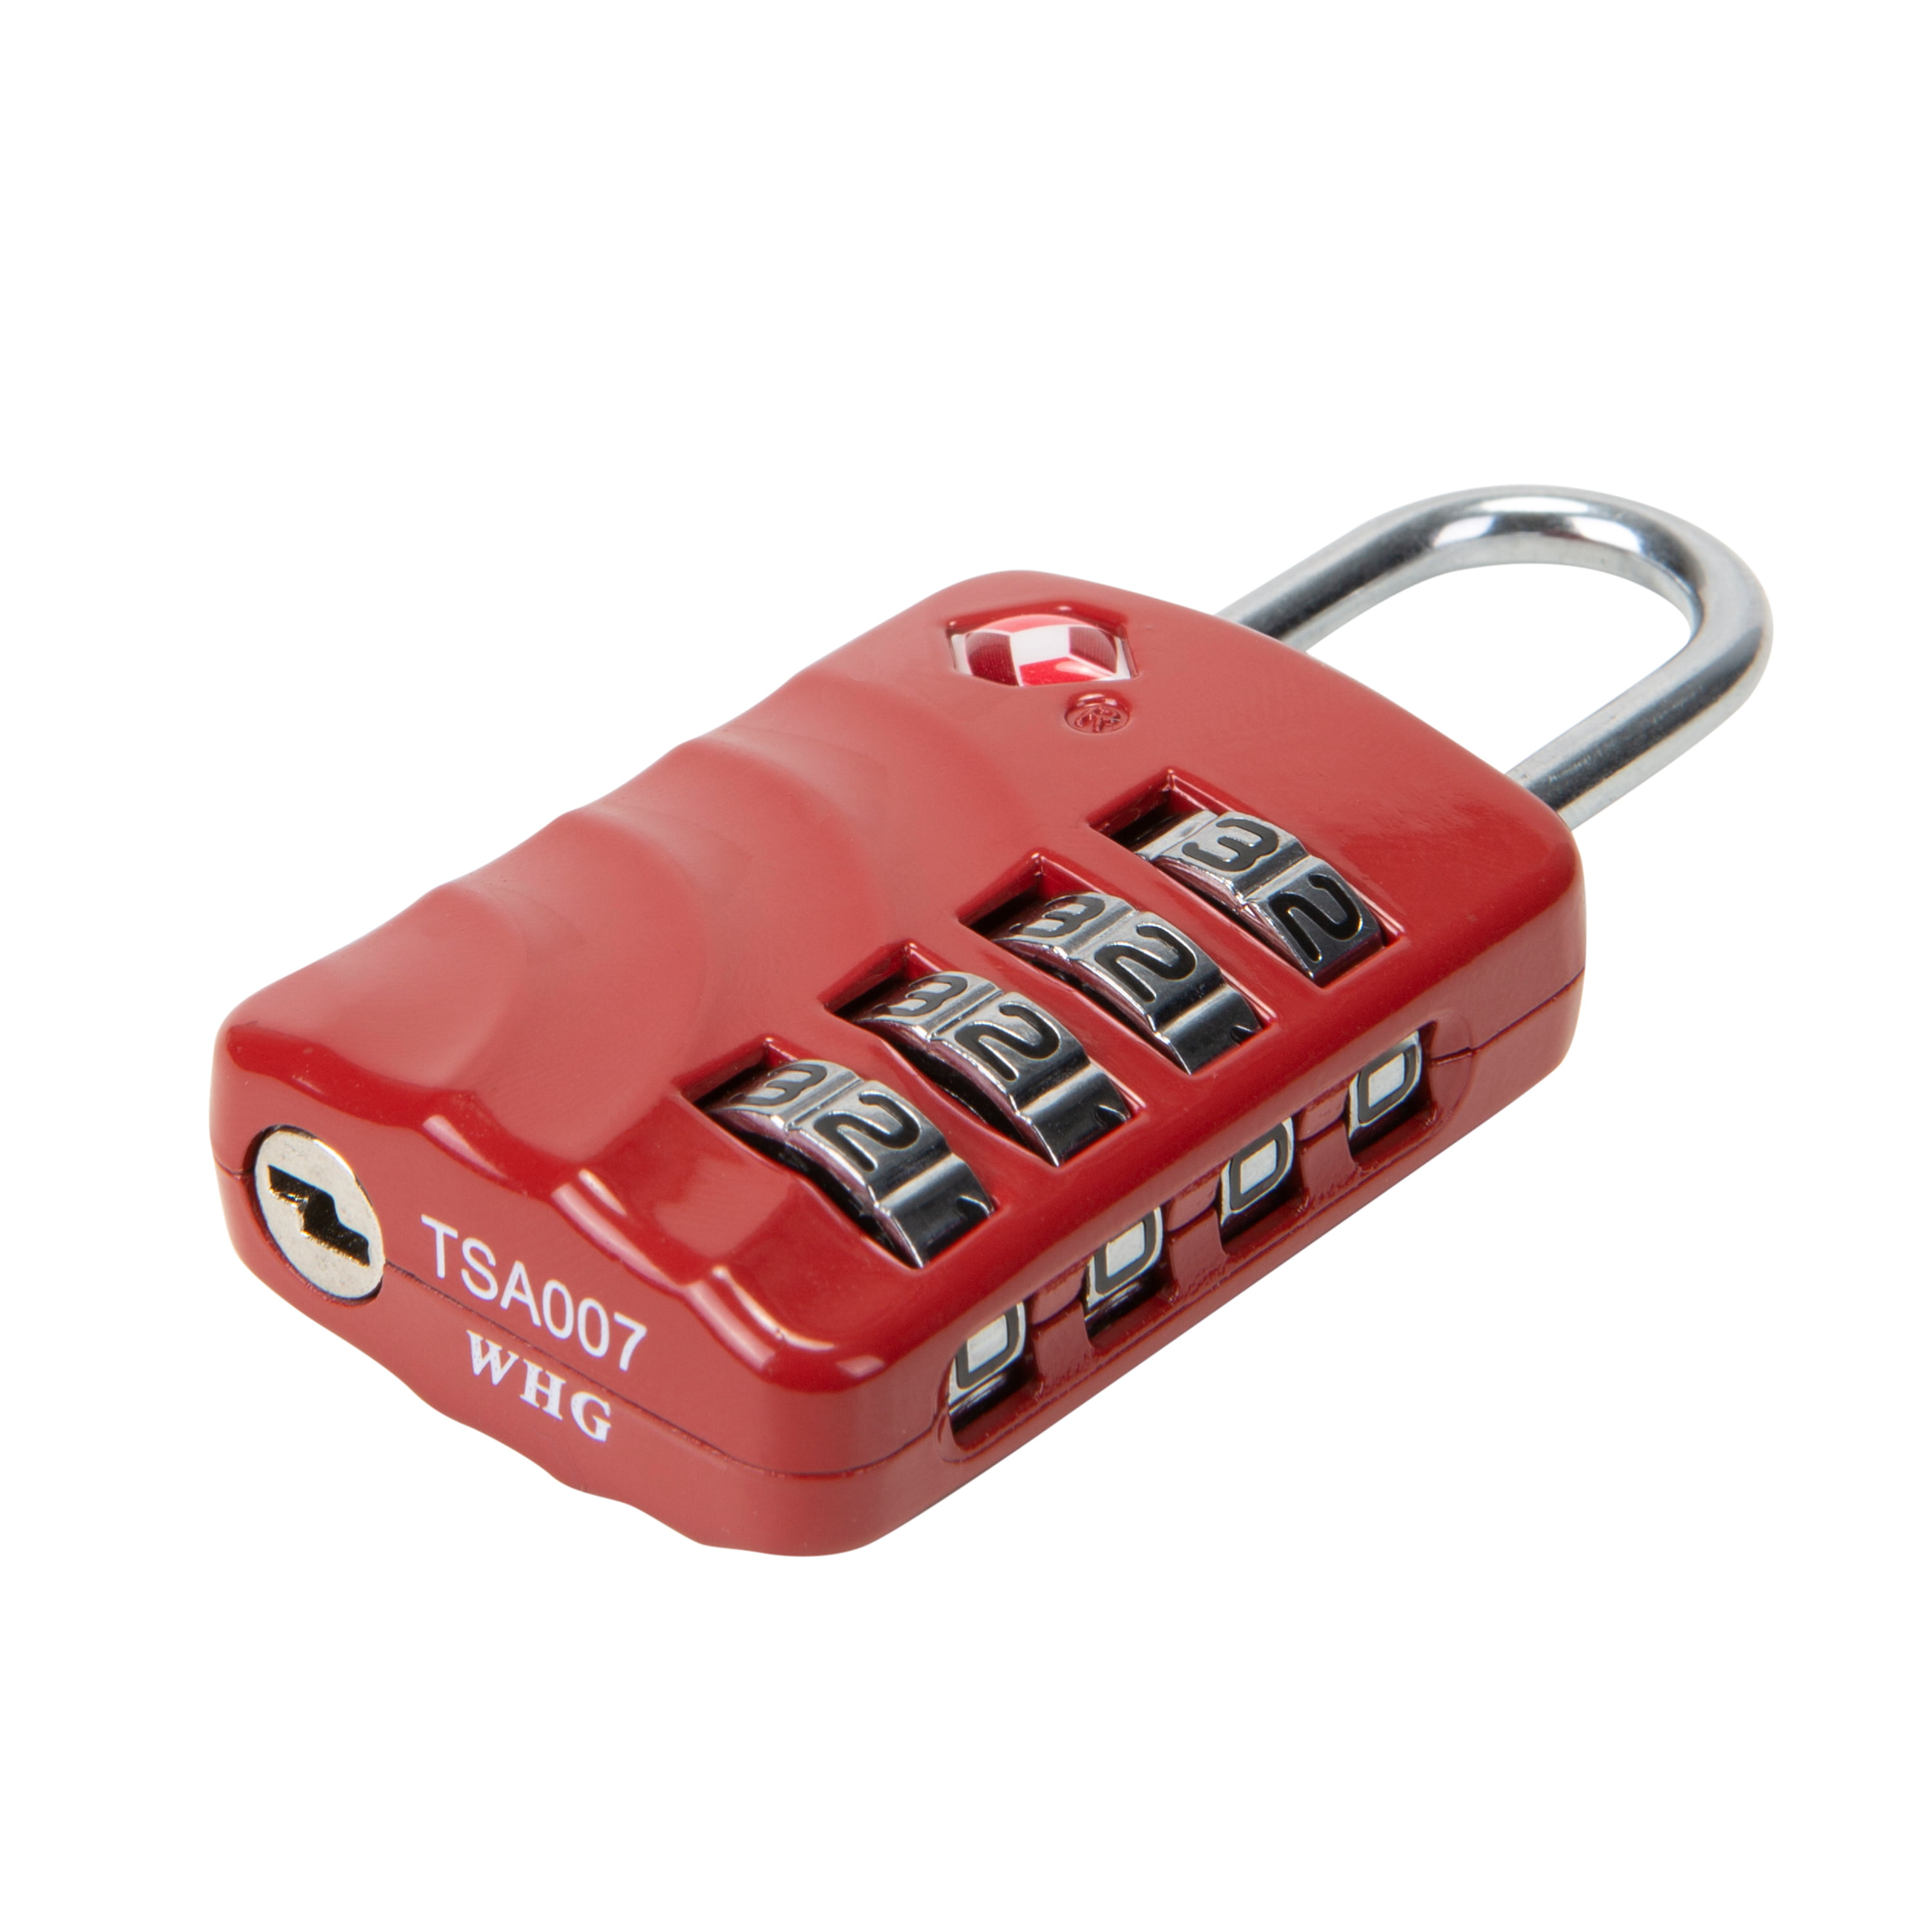 Red TSA-approved Luggage Lock with 4 Dials